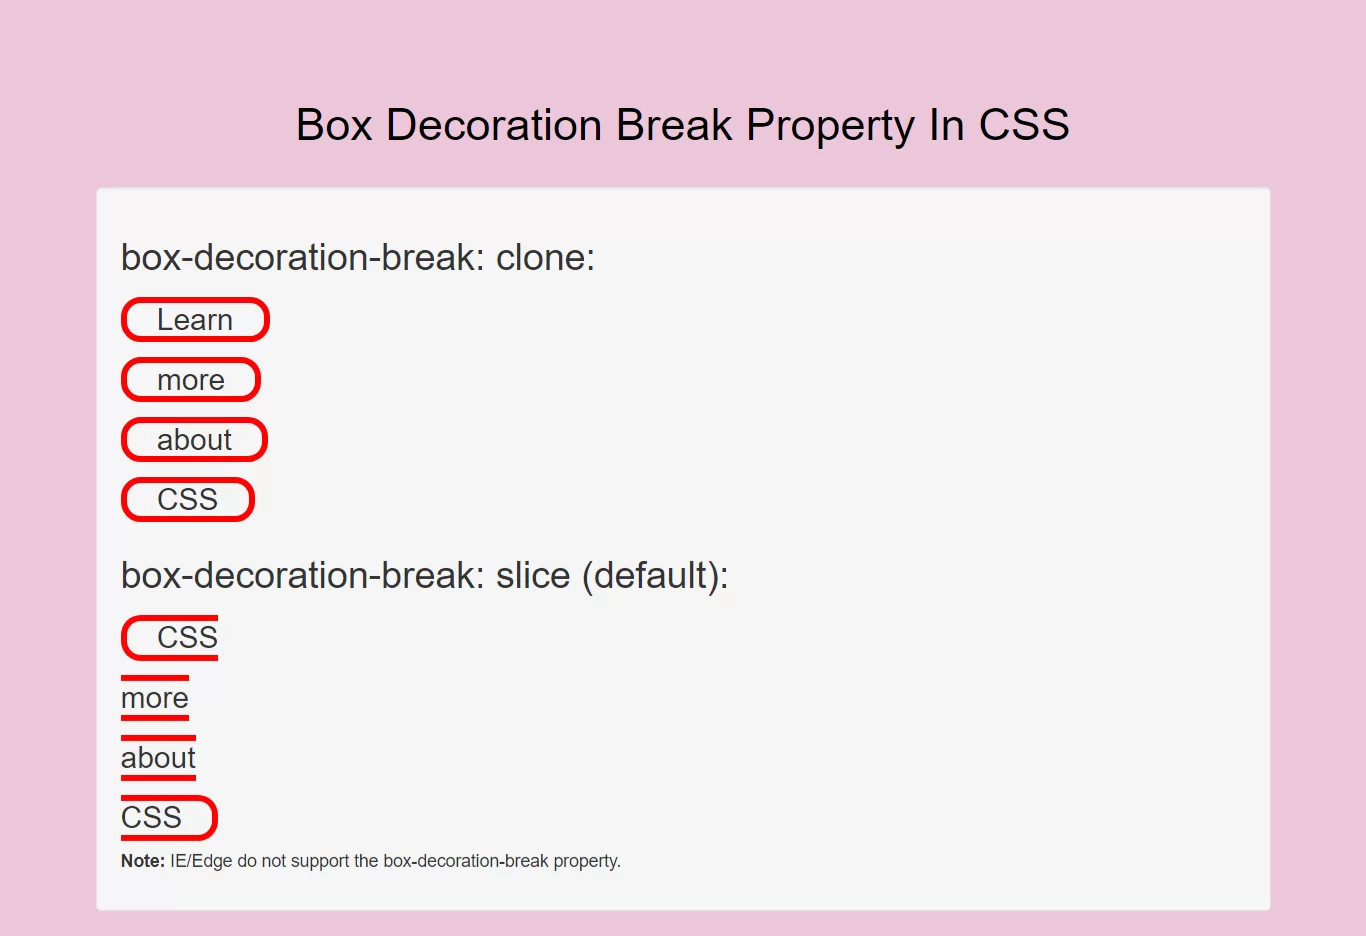 How Can I Use Box Decoration Break Property In CSS